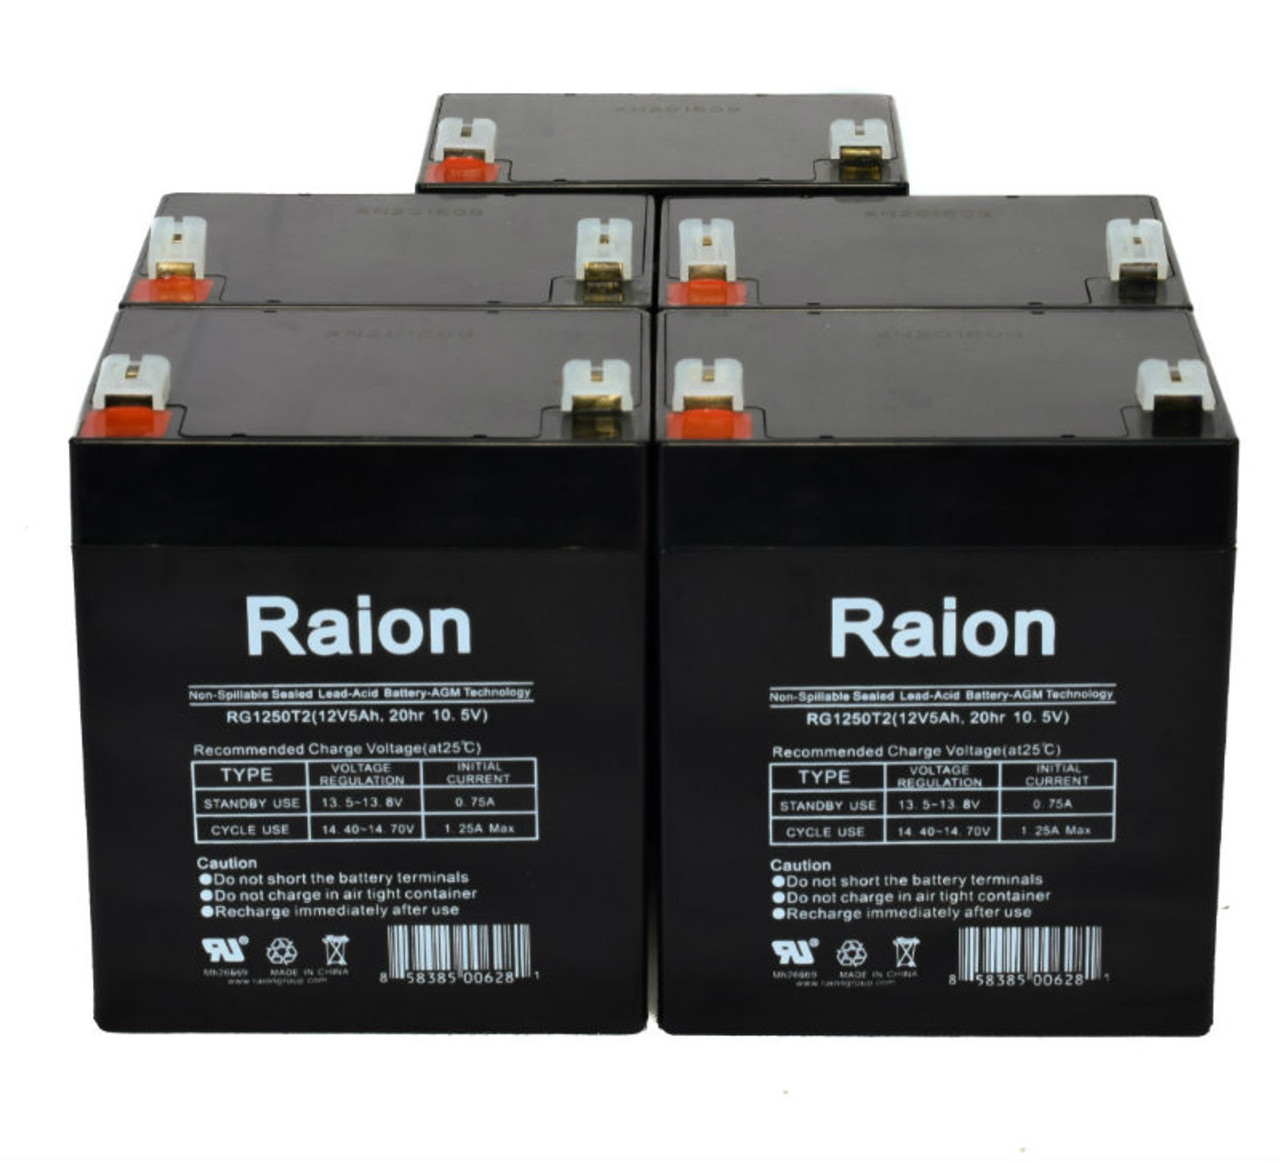 Raion Power RG1250T1 Replacement Fire Alarm Control Panel Battery for Digital Security PC2500 - 8 Pack